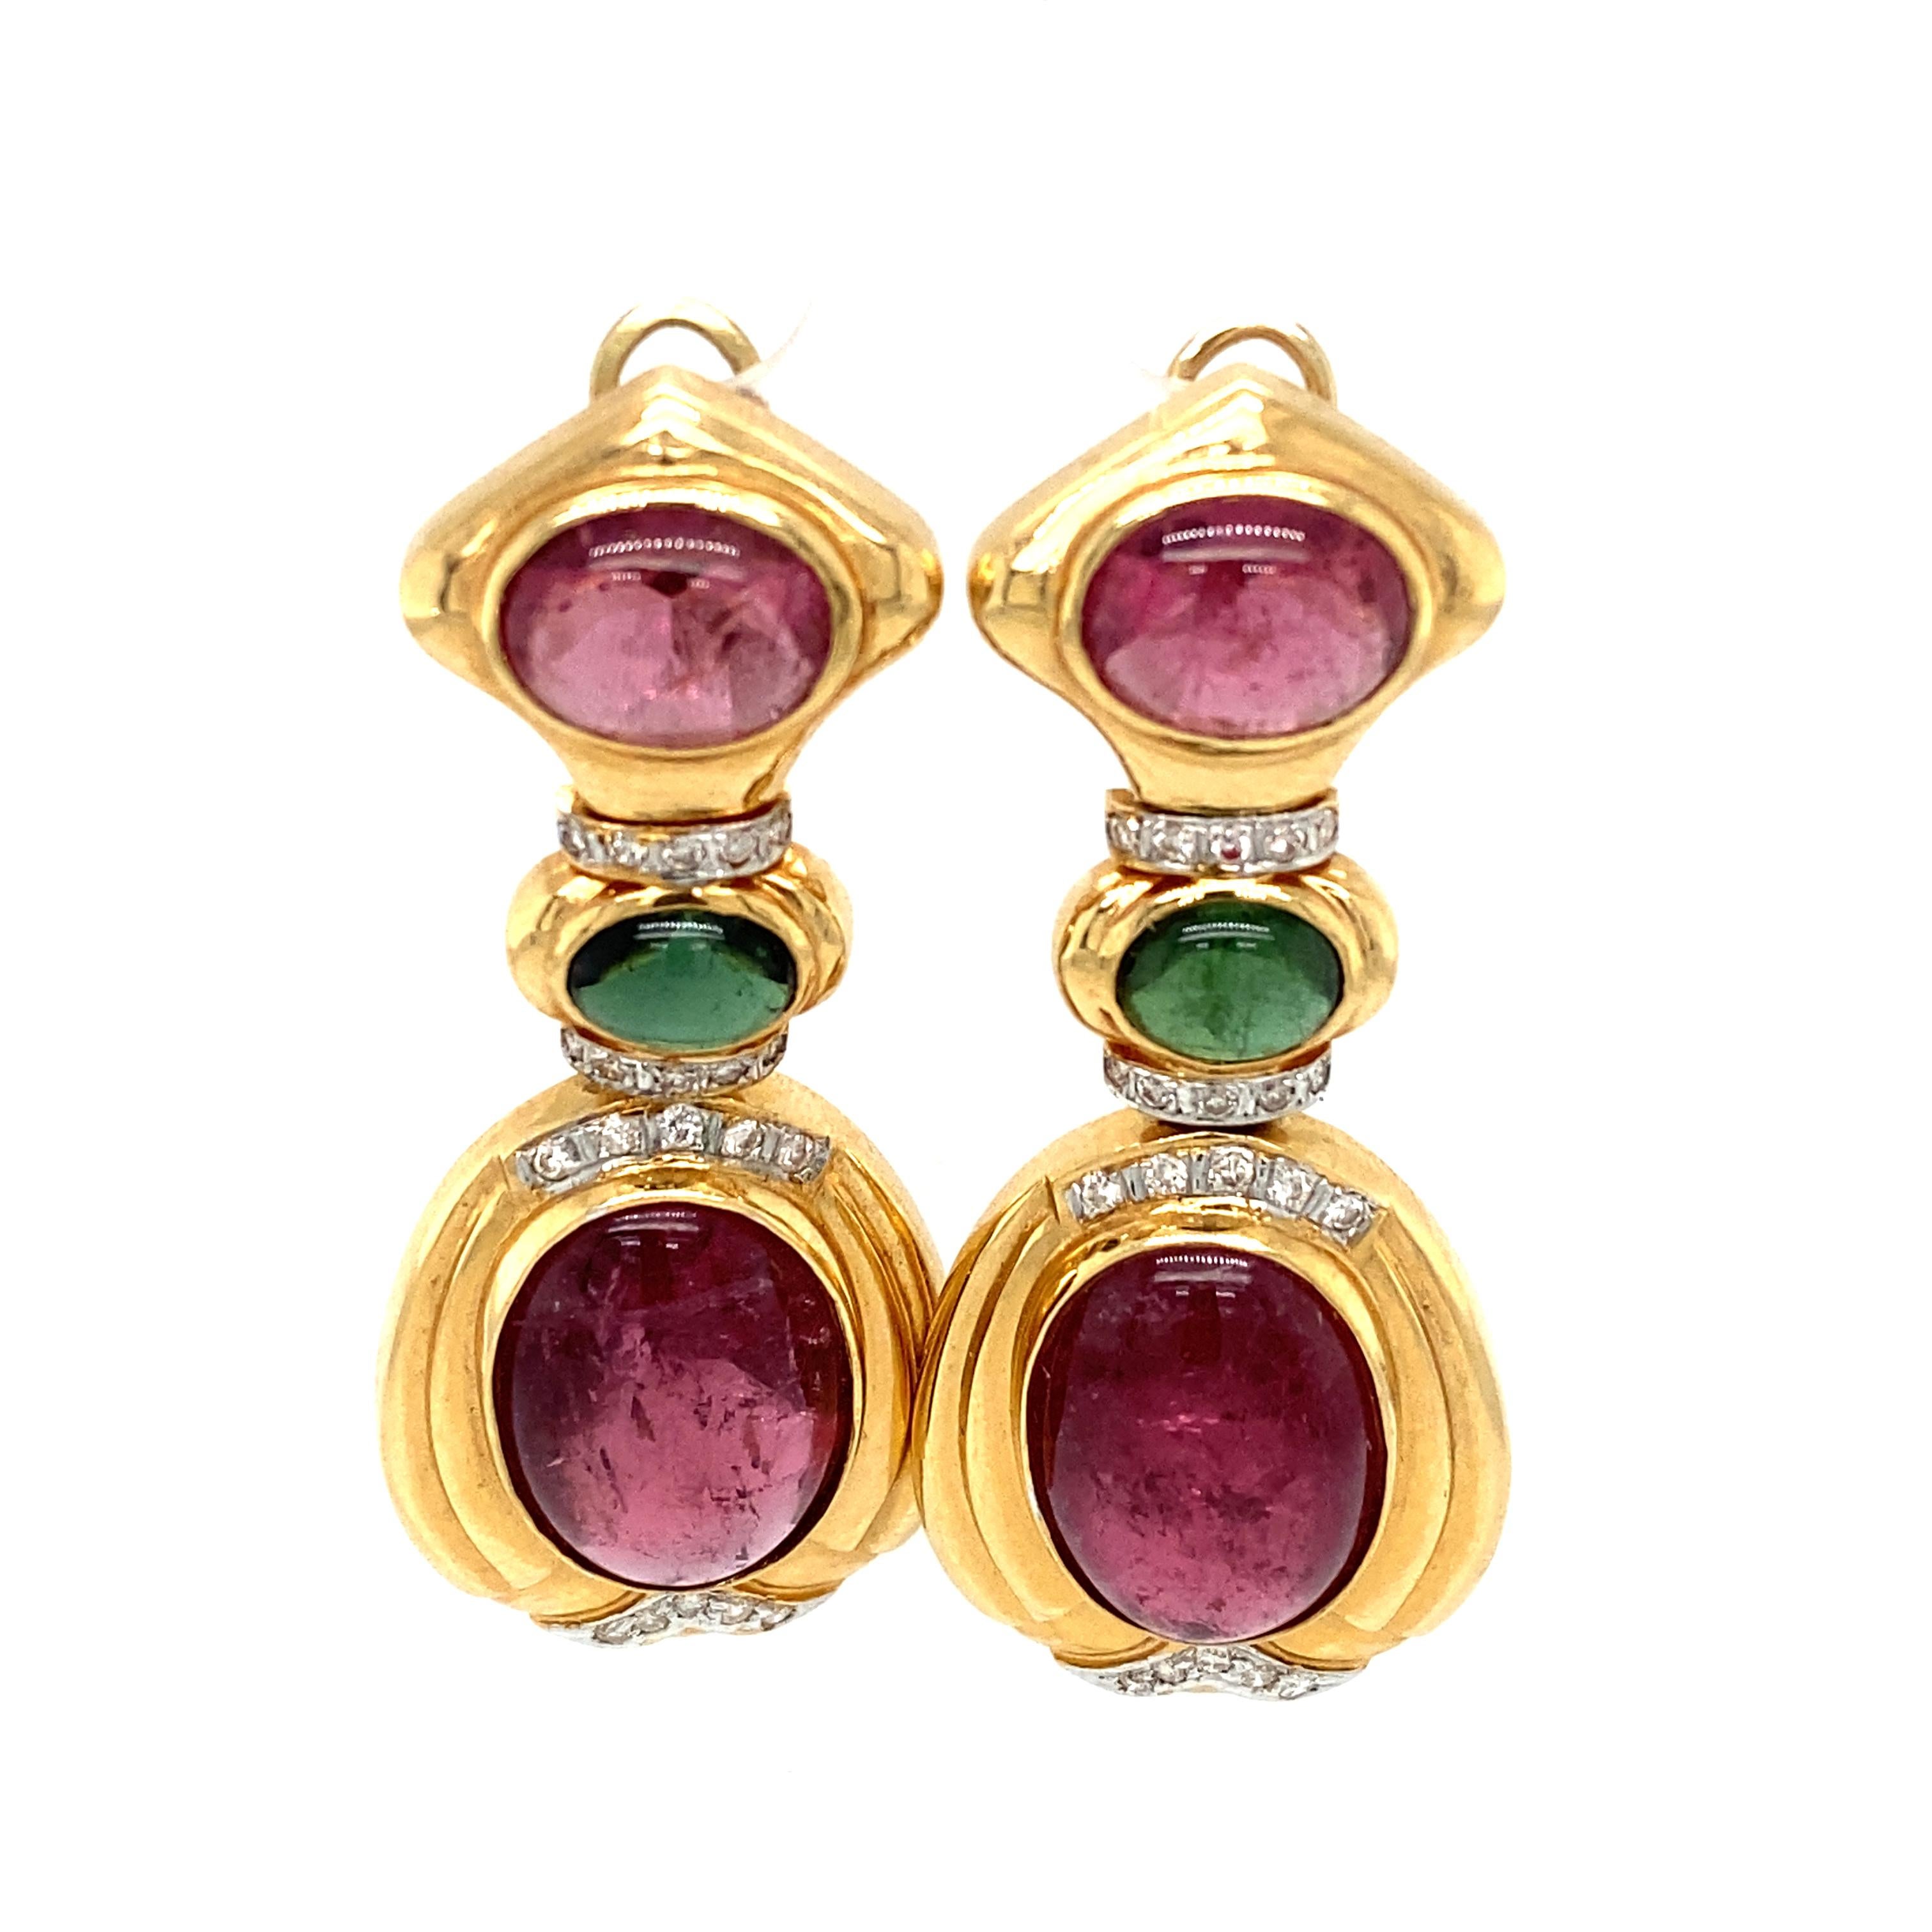 Item Details: These vintage earrings with cabochon green and pink tourmaline have diamond accents. These are perfect as a bold statement piece. The tourmaline stones have excellent saturation and beautiful contrast, and make a great pop of color for